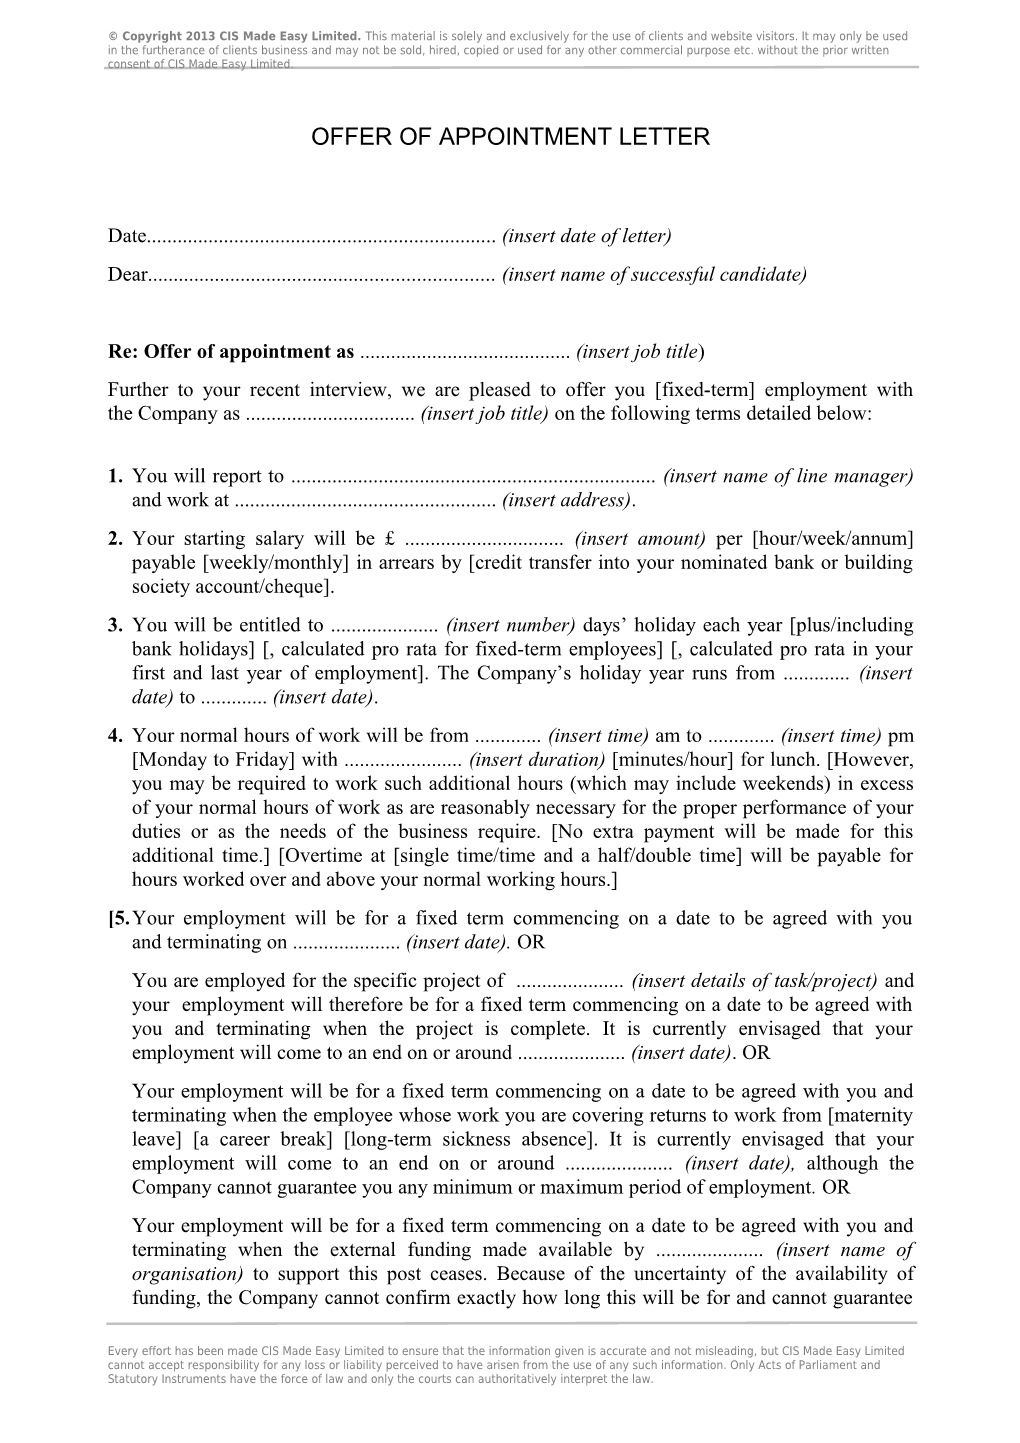 Letter Seeking Agreement to Vary Terms of Contract of Employment